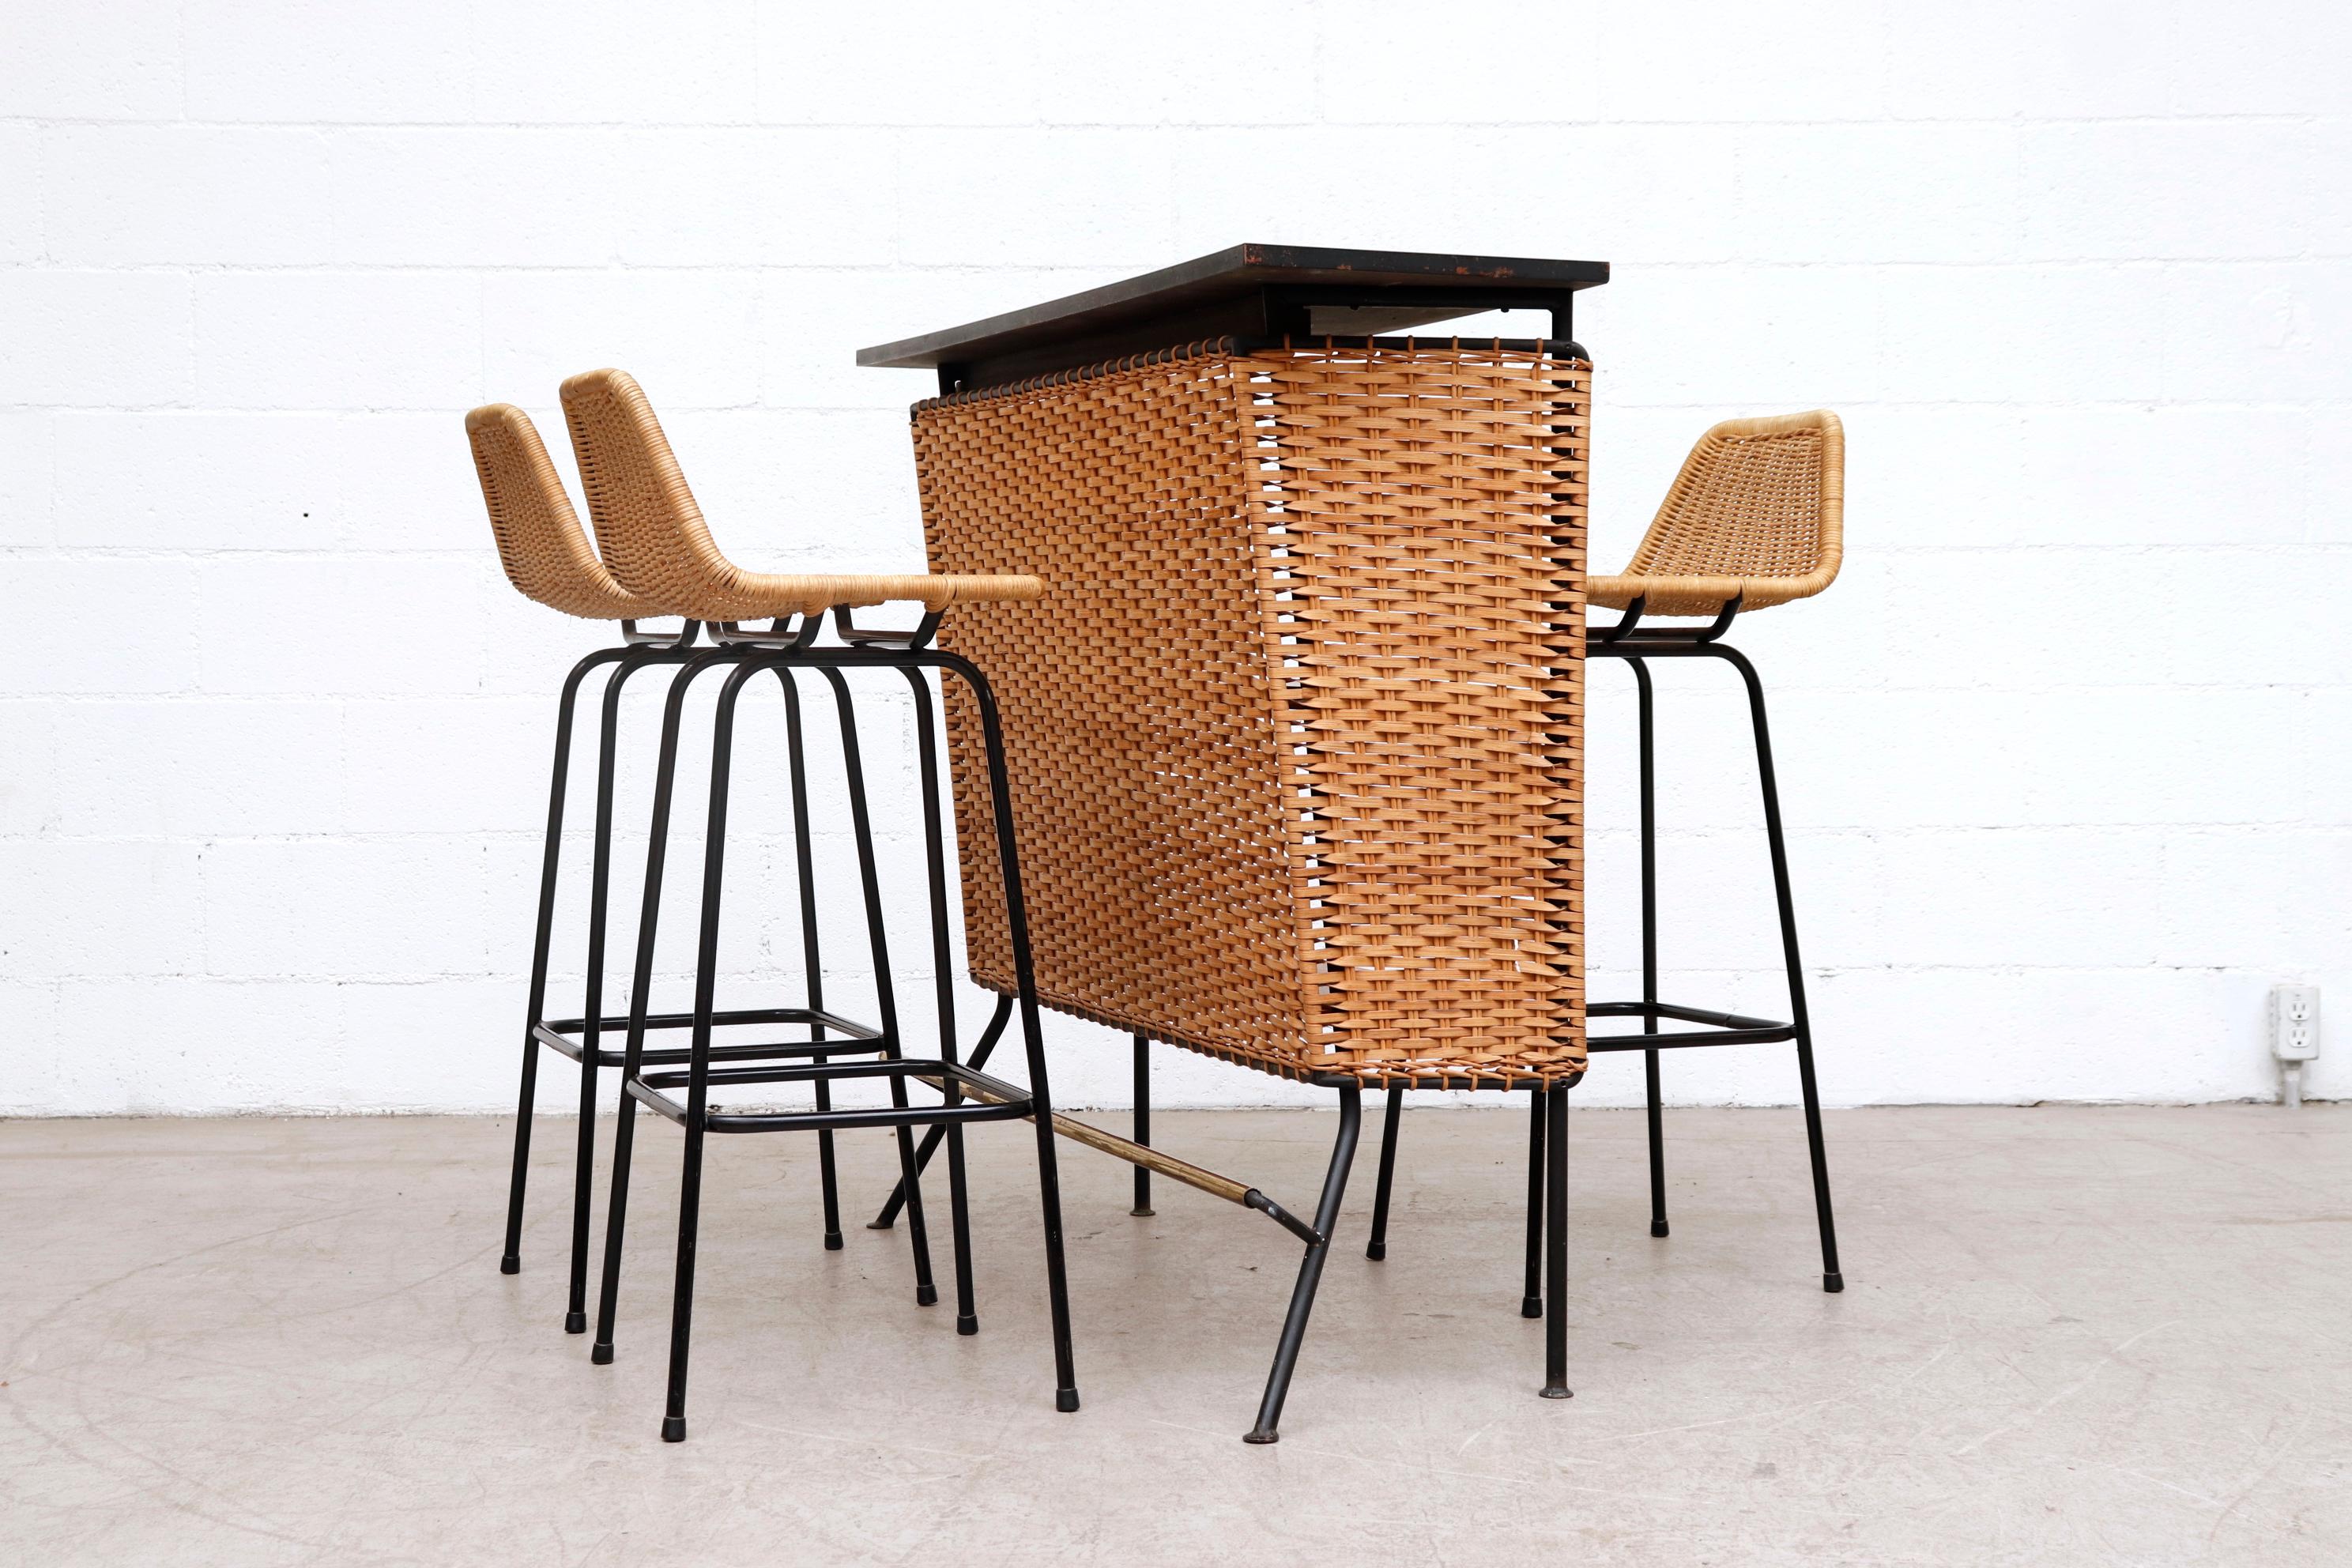 Set of 3 Charlotte Perriand style tall angle backed rattan bar stools by Dirk van Sliedregt with black enameled tubular frame rattan woven seating with light patina. Shown with Weinberg style rattan bar, Listing #LU922419075692. In original